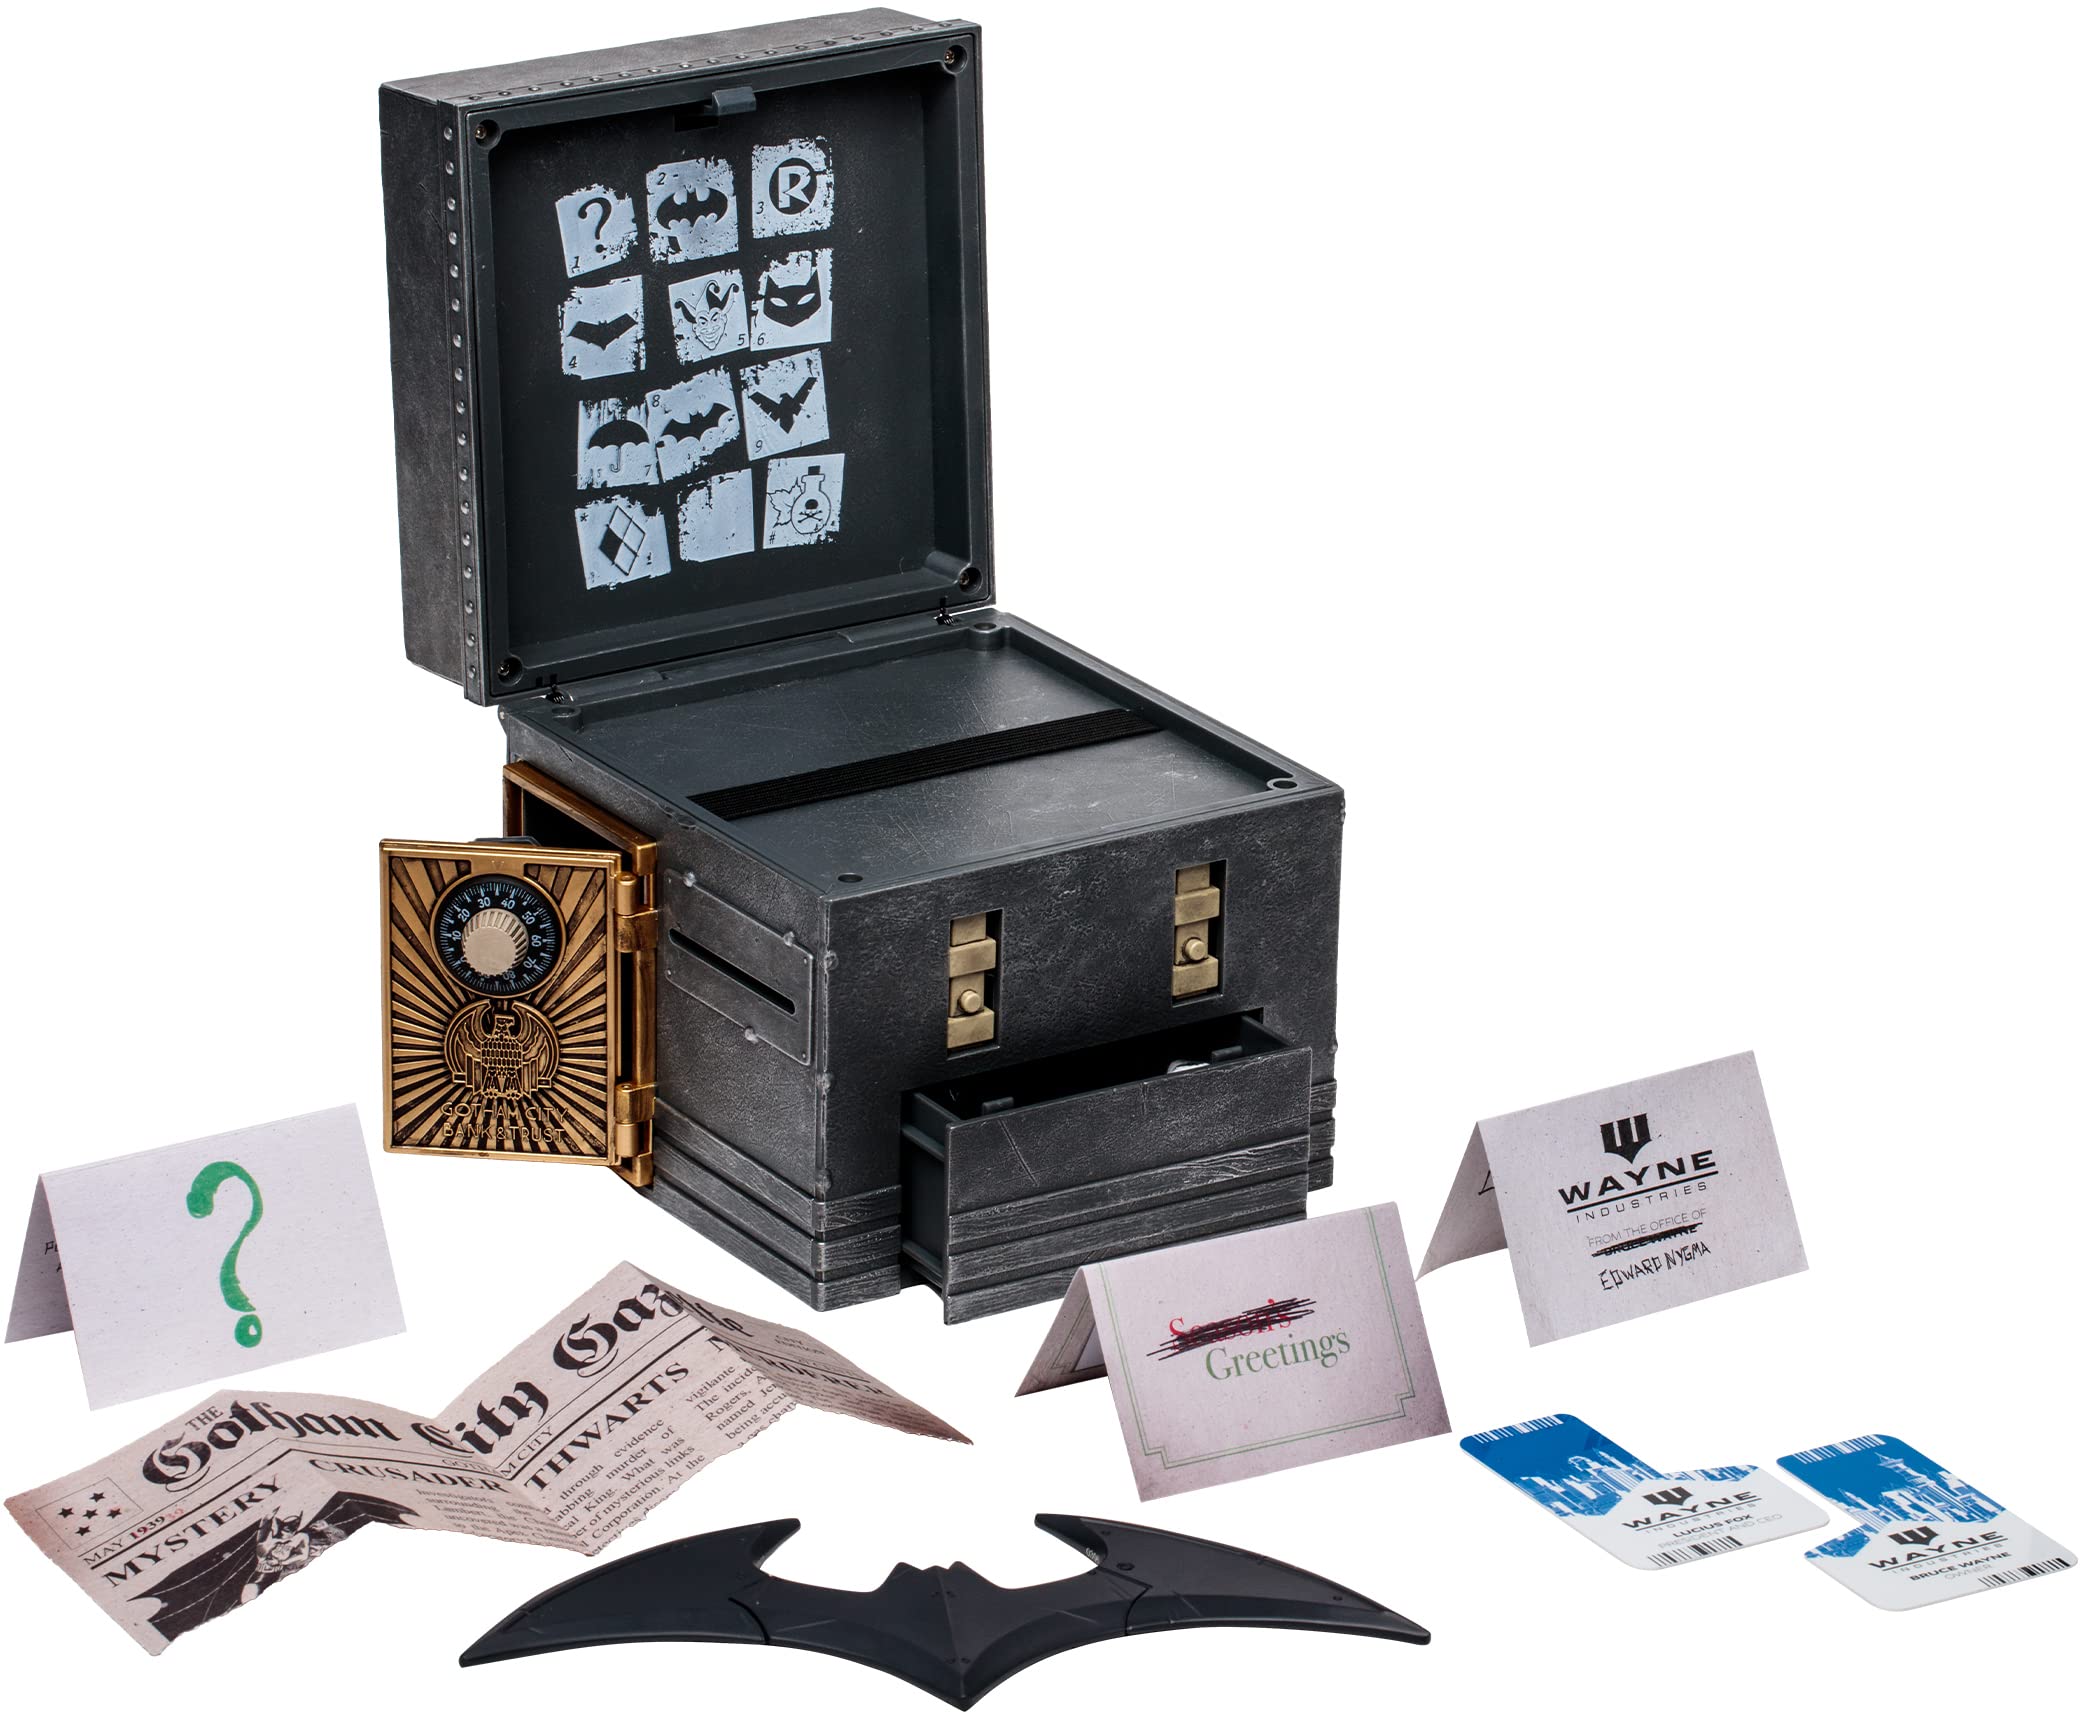 McFarlane Toys DC Direct: The Riddler Puzzle Box by Edward Nygma $40 + Free Shipping